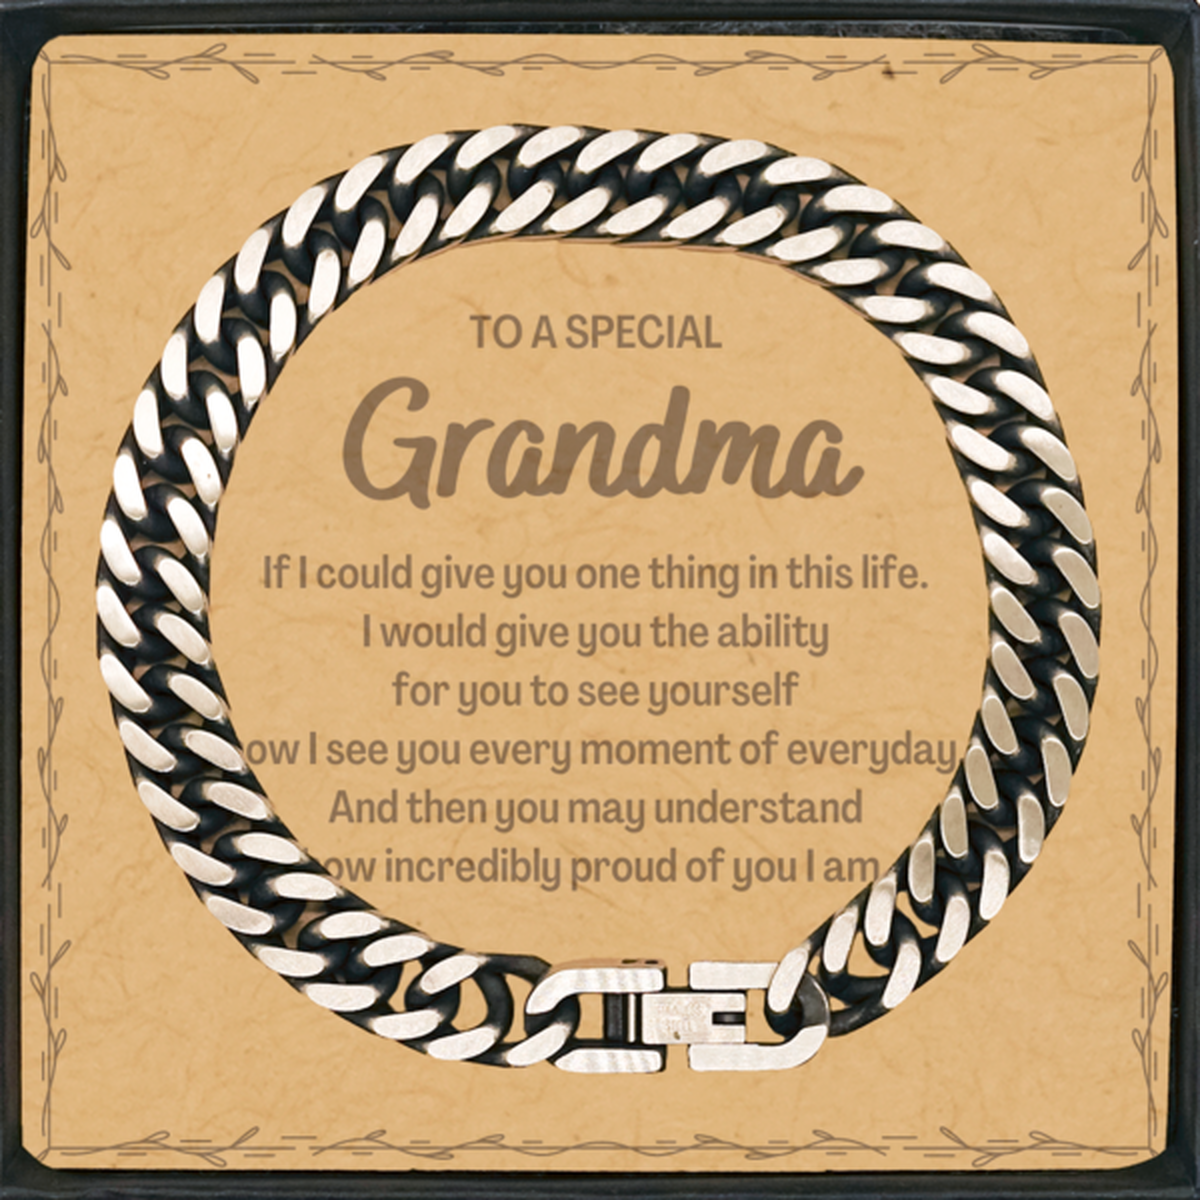 To My Grandma Cuban Link Chain Bracelet, Gifts For Grandma Message Card, Inspirational Gifts for Christmas Birthday, Epic Gifts for Grandma To A Special Grandma how incredibly proud of you I am